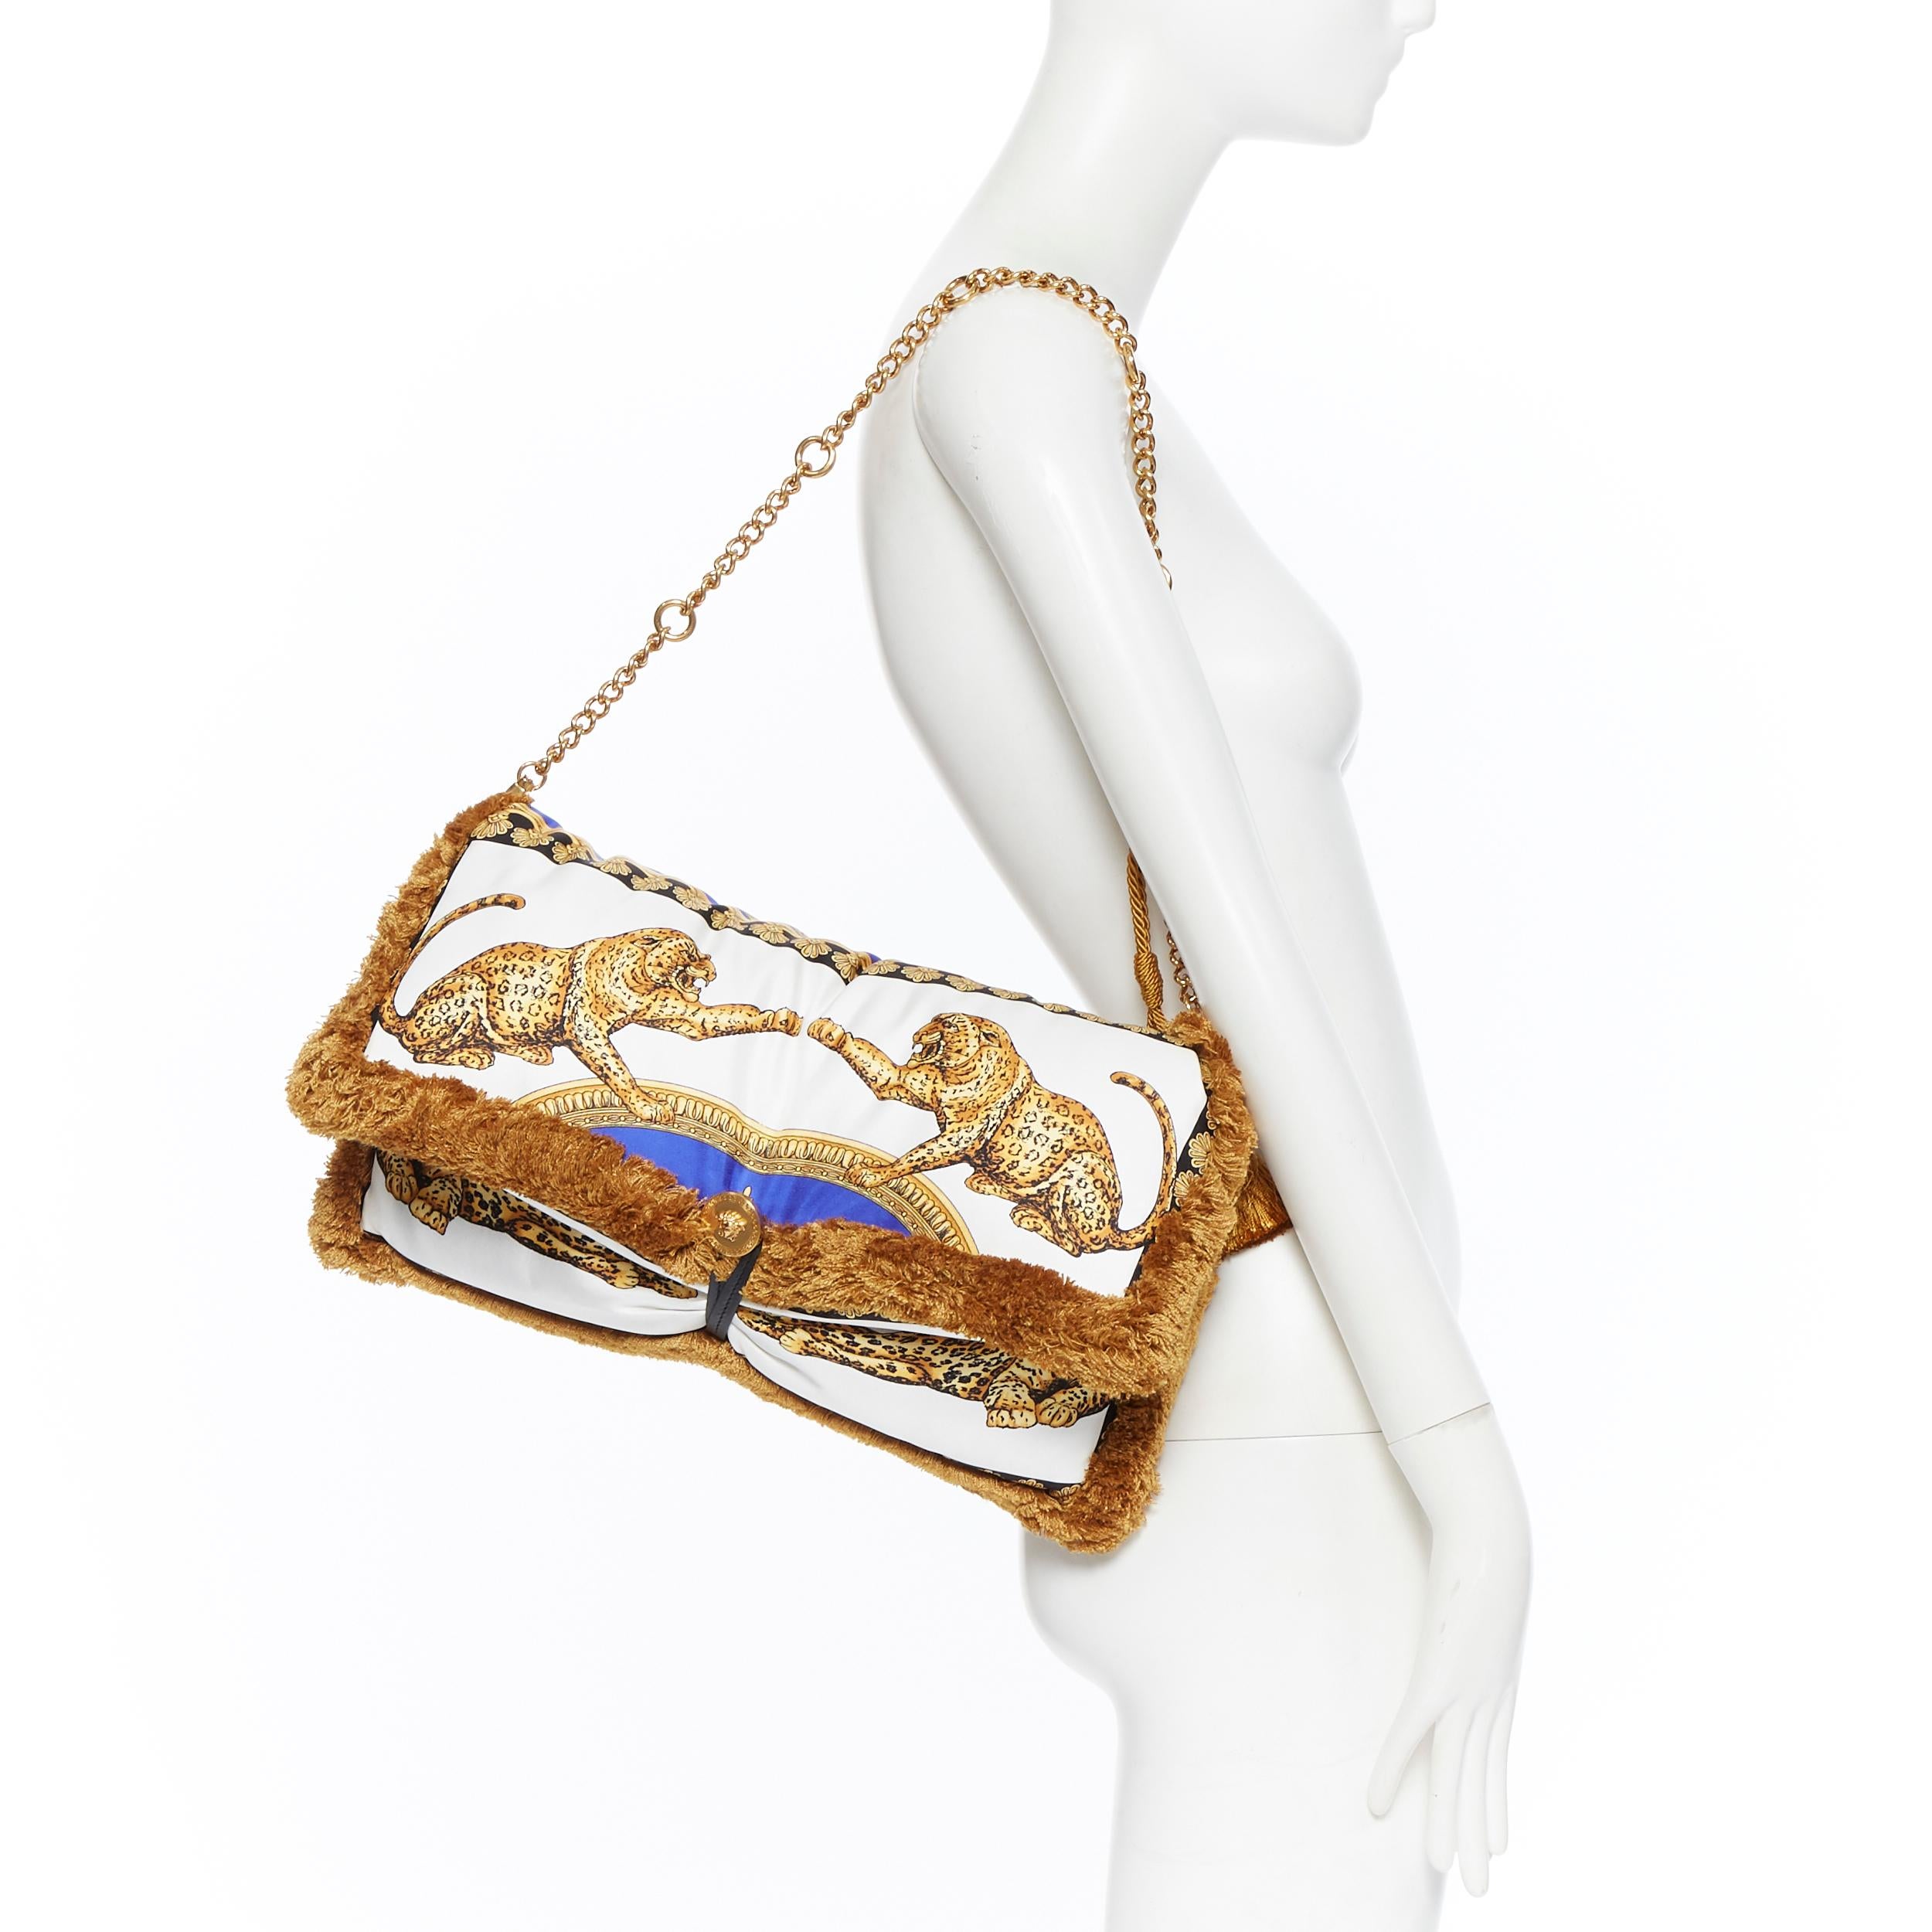 new VERSACE 2018 Runway Pillow Talk baroque leopard silk tassel shoulder bag
Brand: Versace
Designer: Donatella Versace
Collection: 2018
Model Name / Style: Pillow Talk
Material: Fabric
Color: Gold, blue
Pattern: Abstract
Extra Detail: Pillow Talk